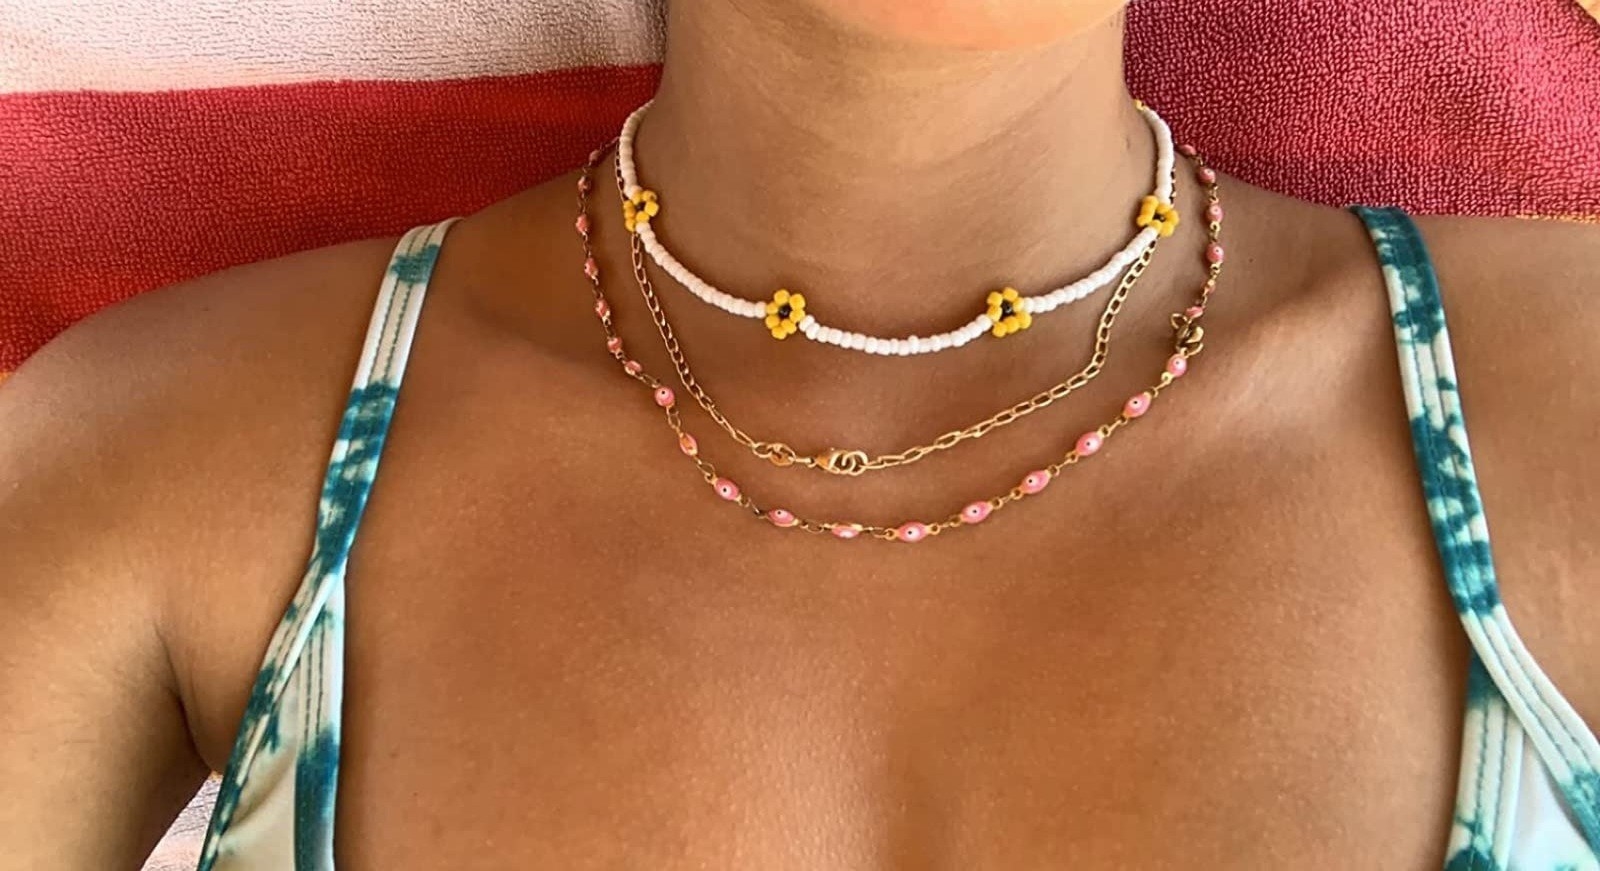 Reviewer wearing the white necklace with yellow flowers and a pink and gold chain as well